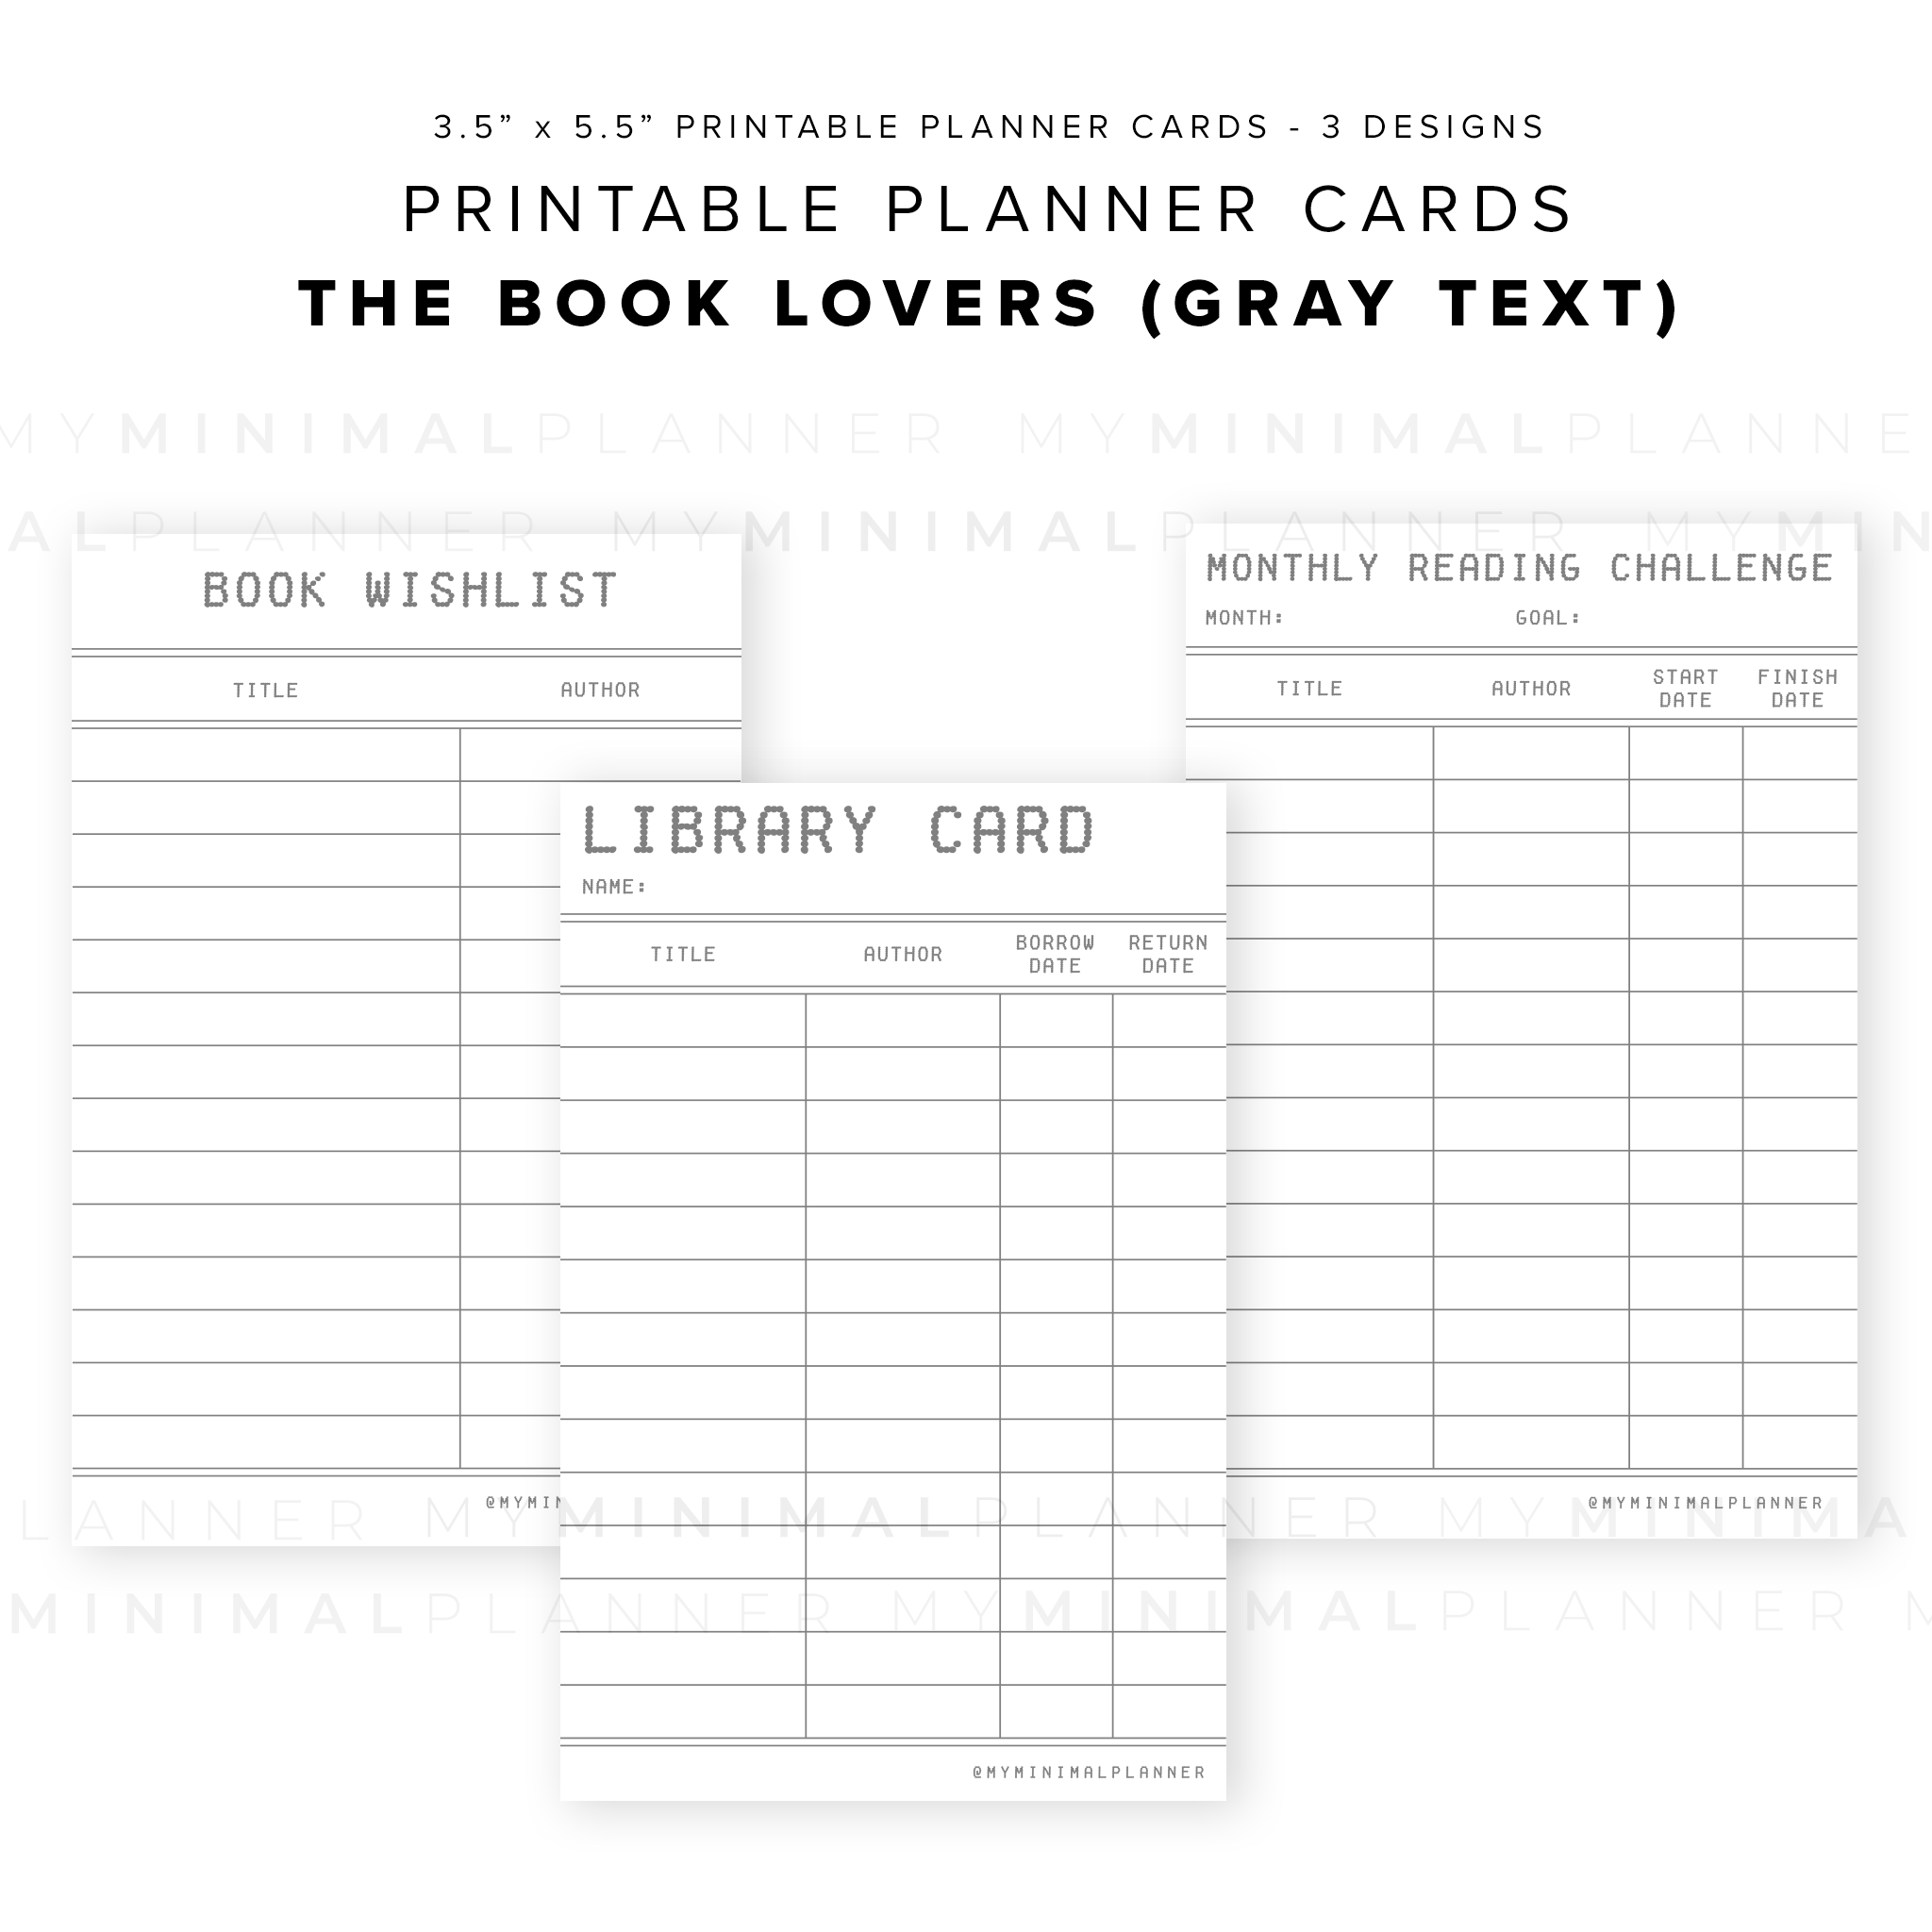 PPC03 - The Book Lovers - Printable Planner Cards